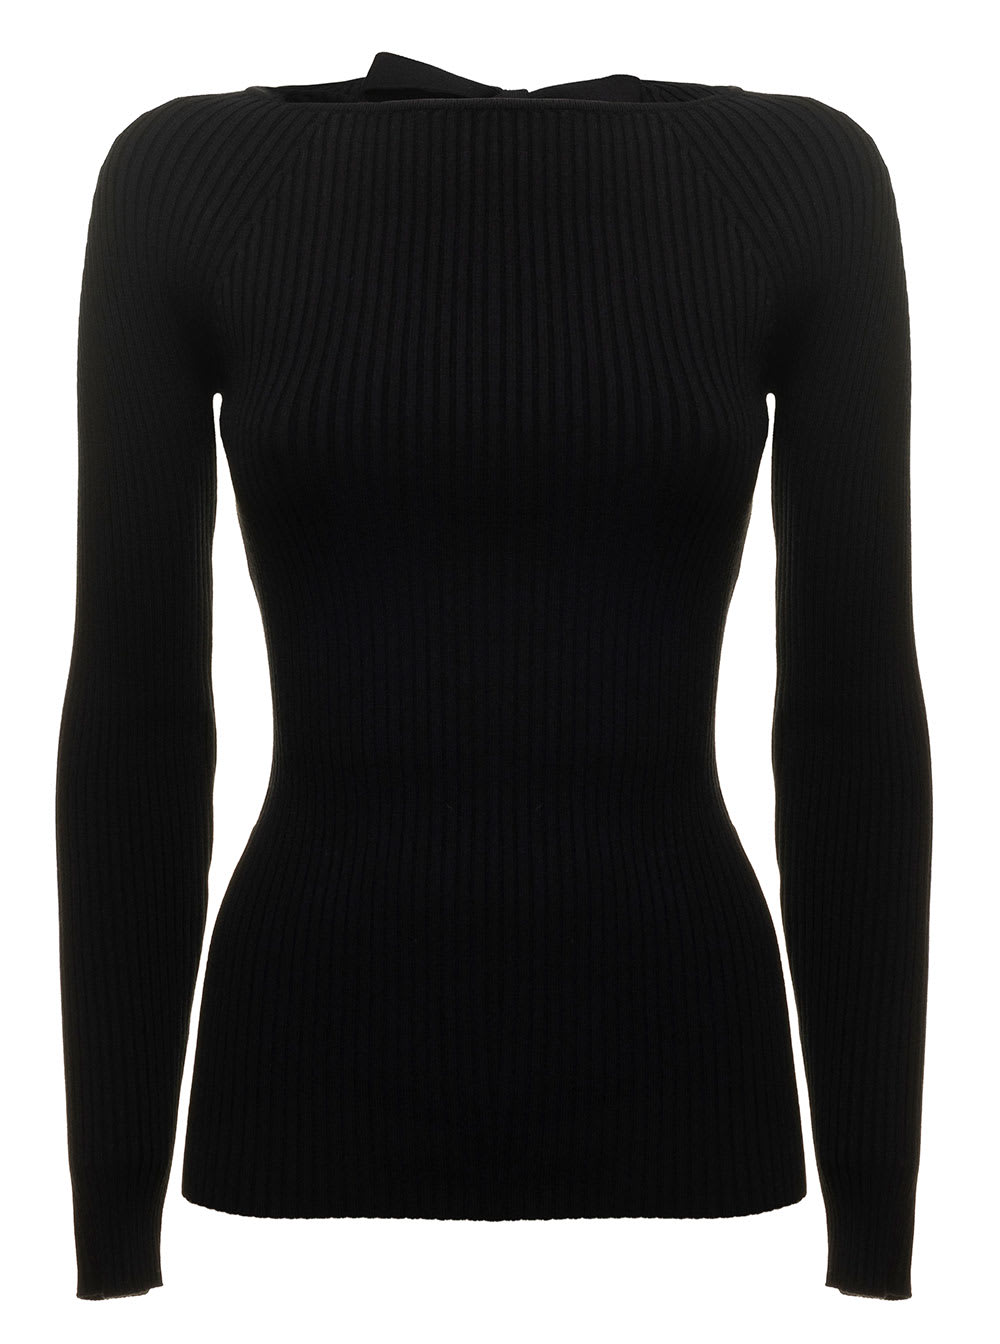 GIUSEPPE DI MORABITO VISCOSA KNITTED TOP WITH CHAIN DETAILS